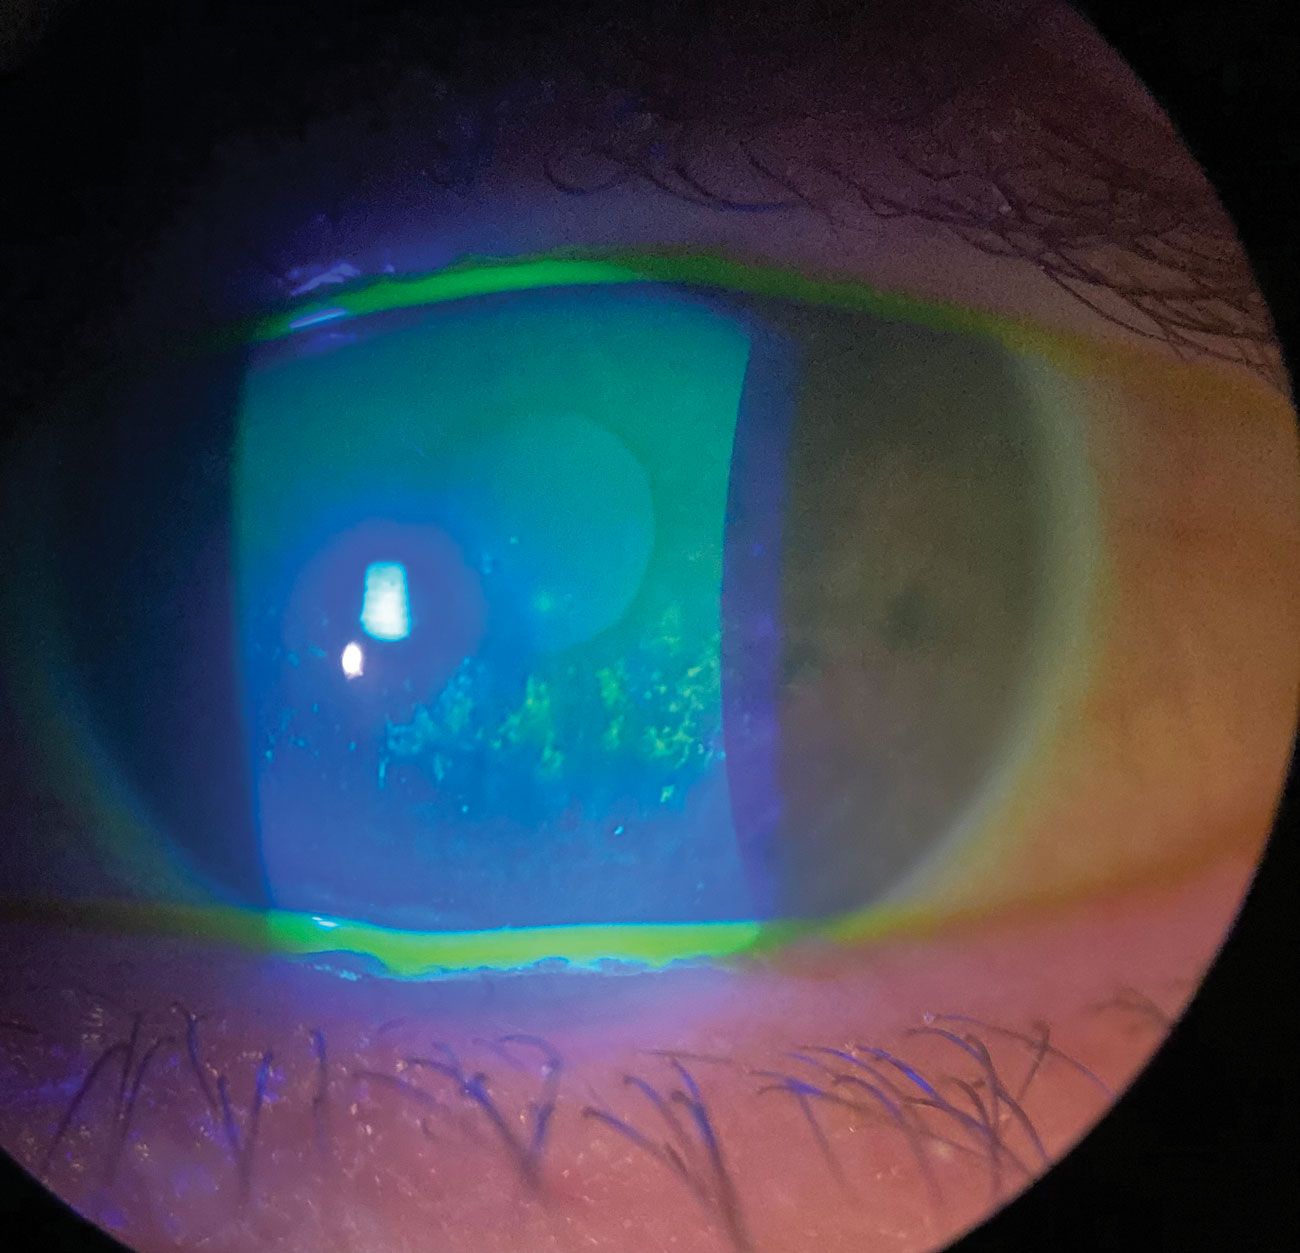 In patients with rheumatoid arthritis who experience ocular surface disease, clinicians should avoid tear osmolarity testing in the absence of independent studies confirming a diagnostic role, researchers argue.